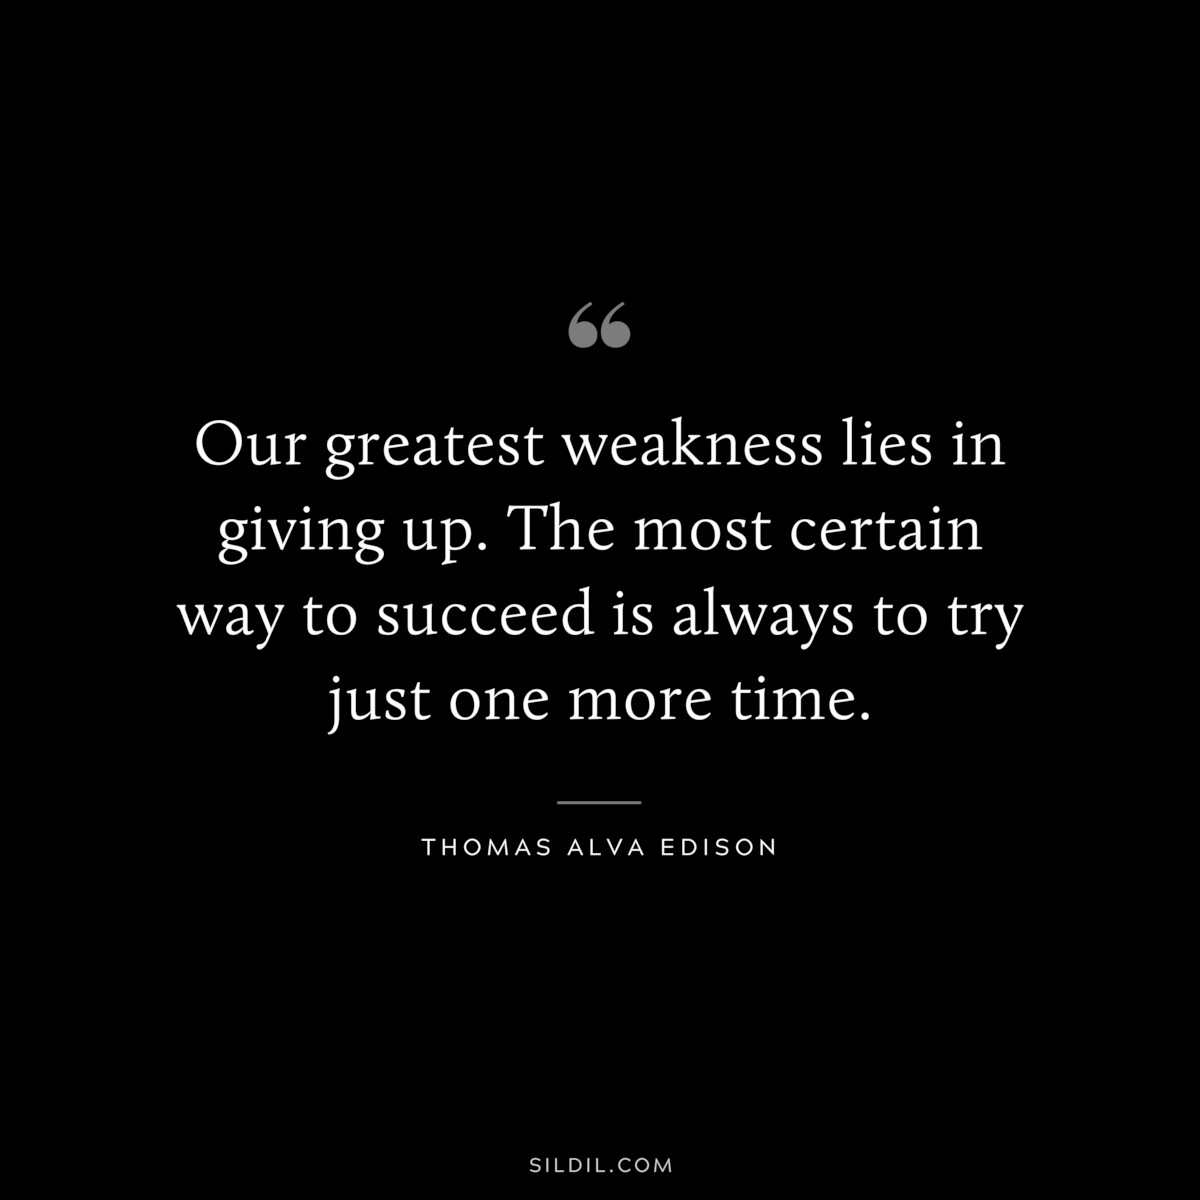 Our greatest weakness lies in giving up. The most certain way to succeed is always to try just one more time. ― Thomas Alva Edison